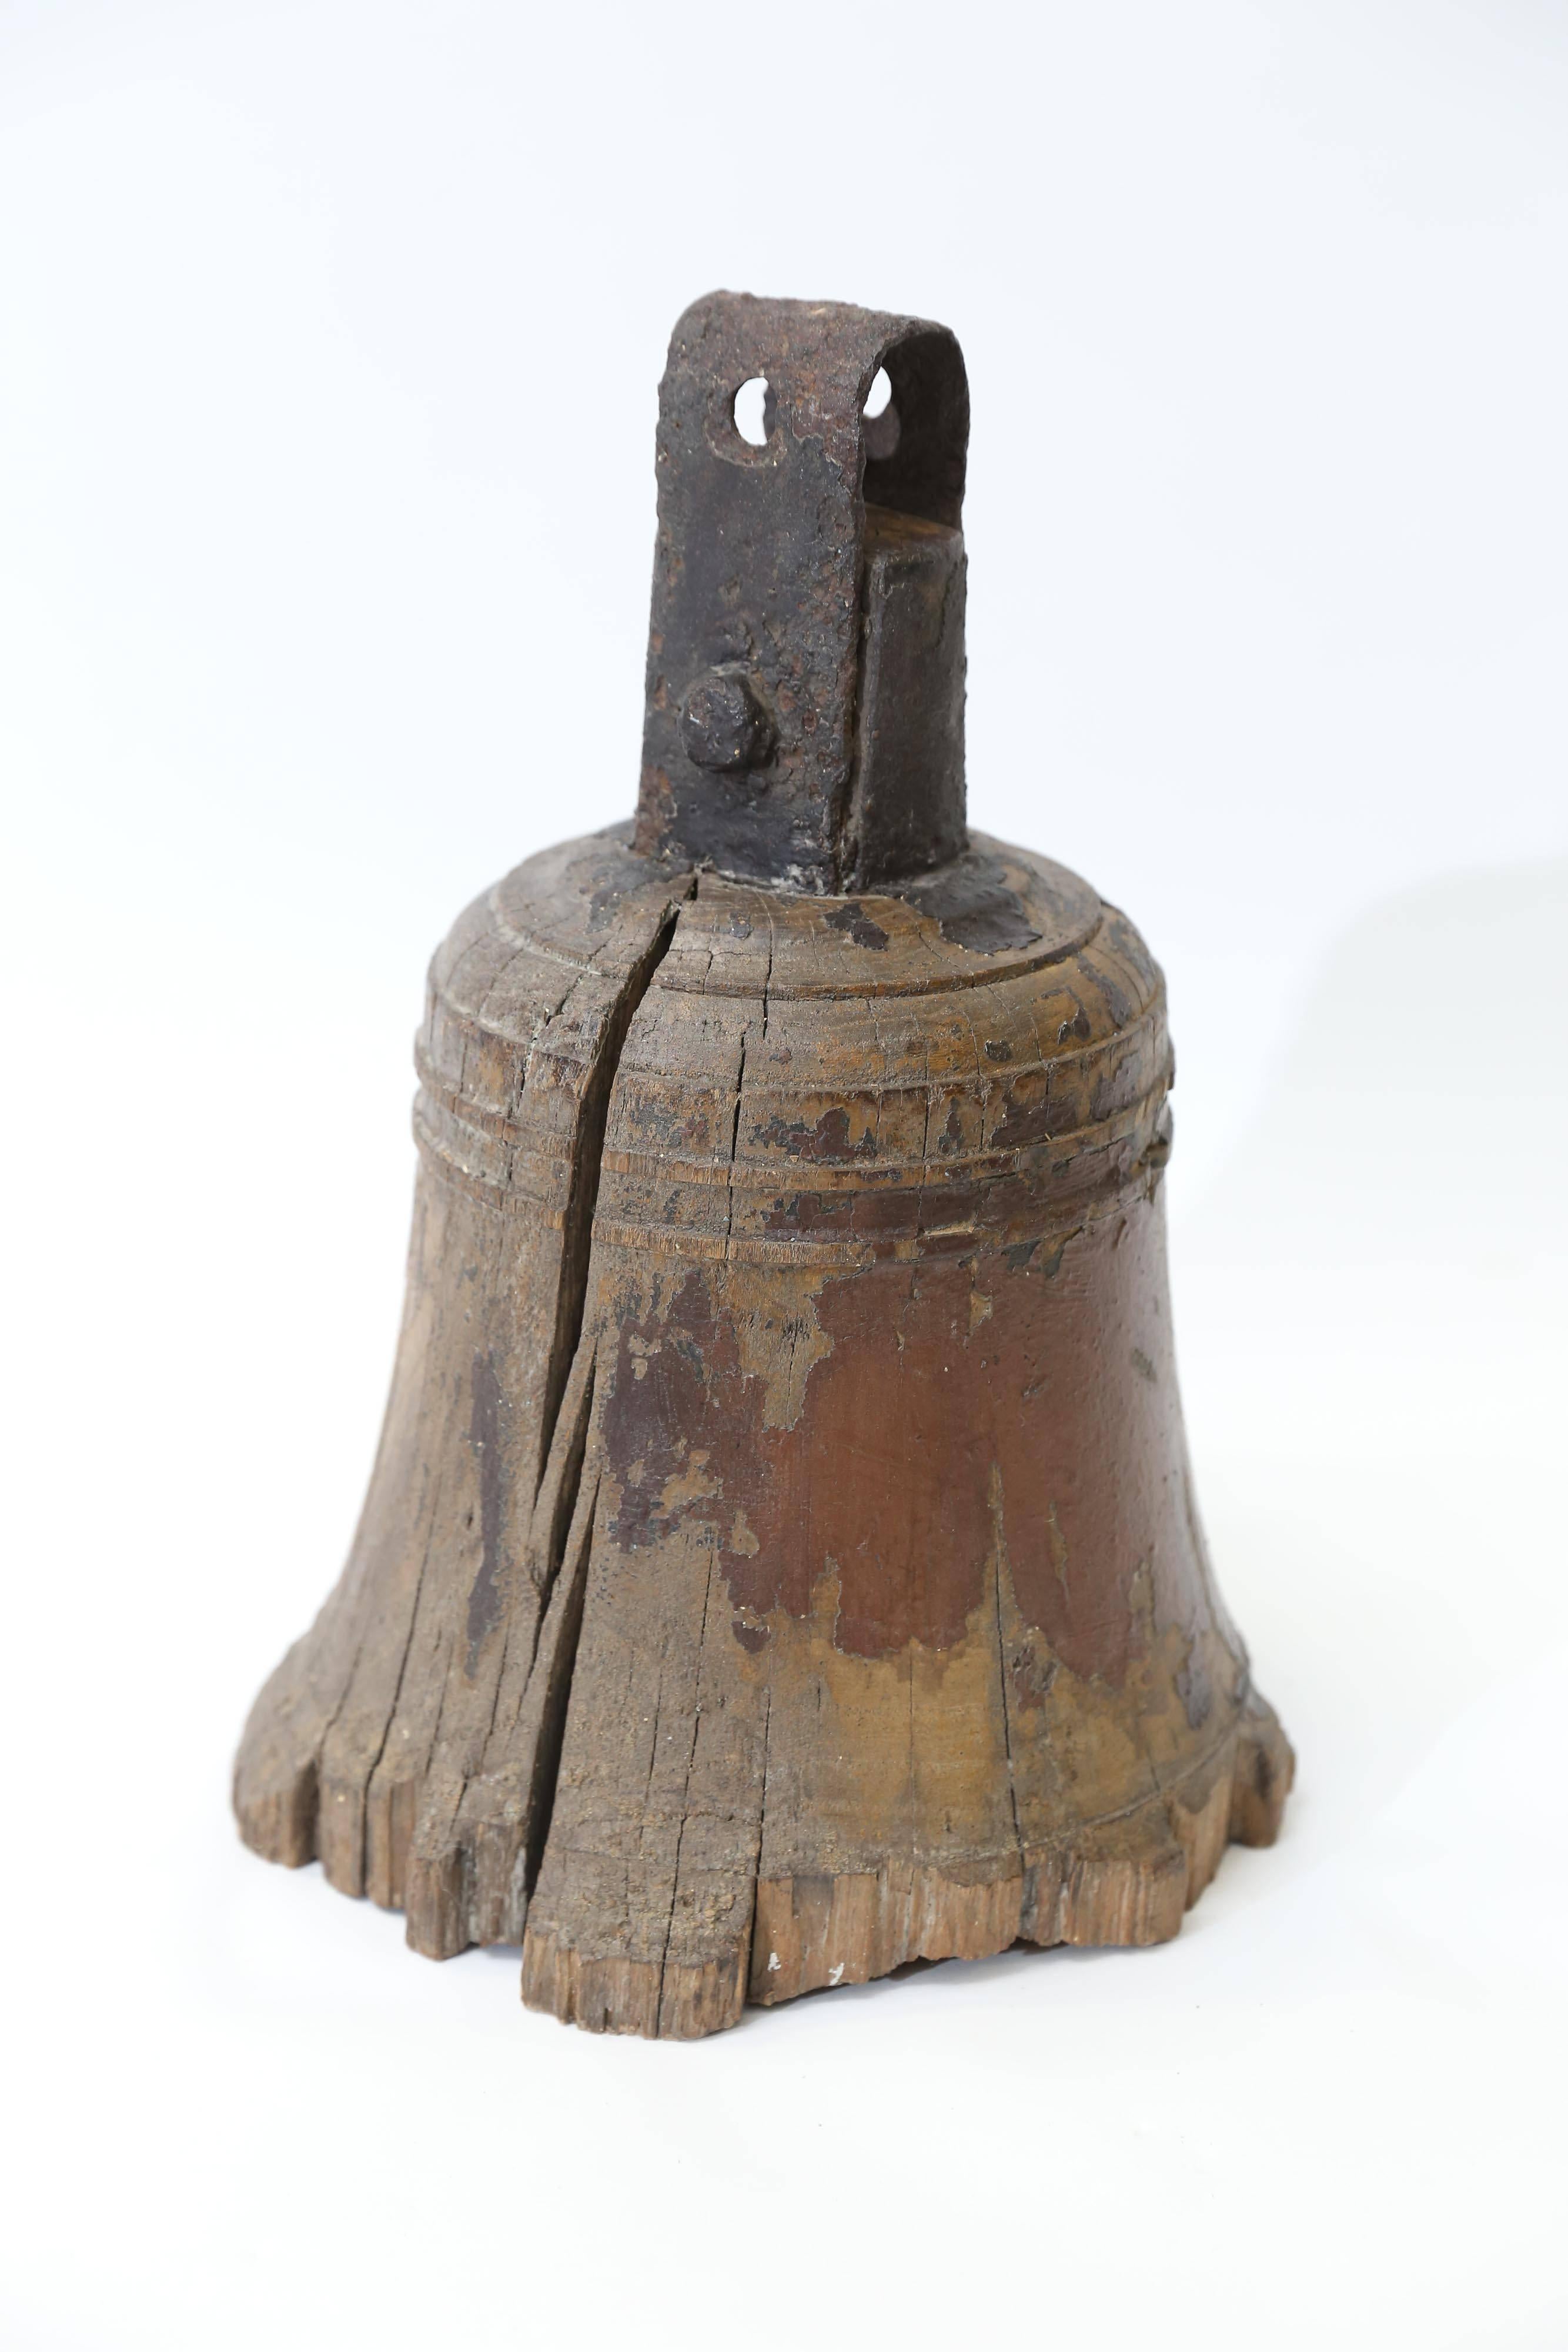 19th Century Wooden Bell-Shaped Object from Sweden